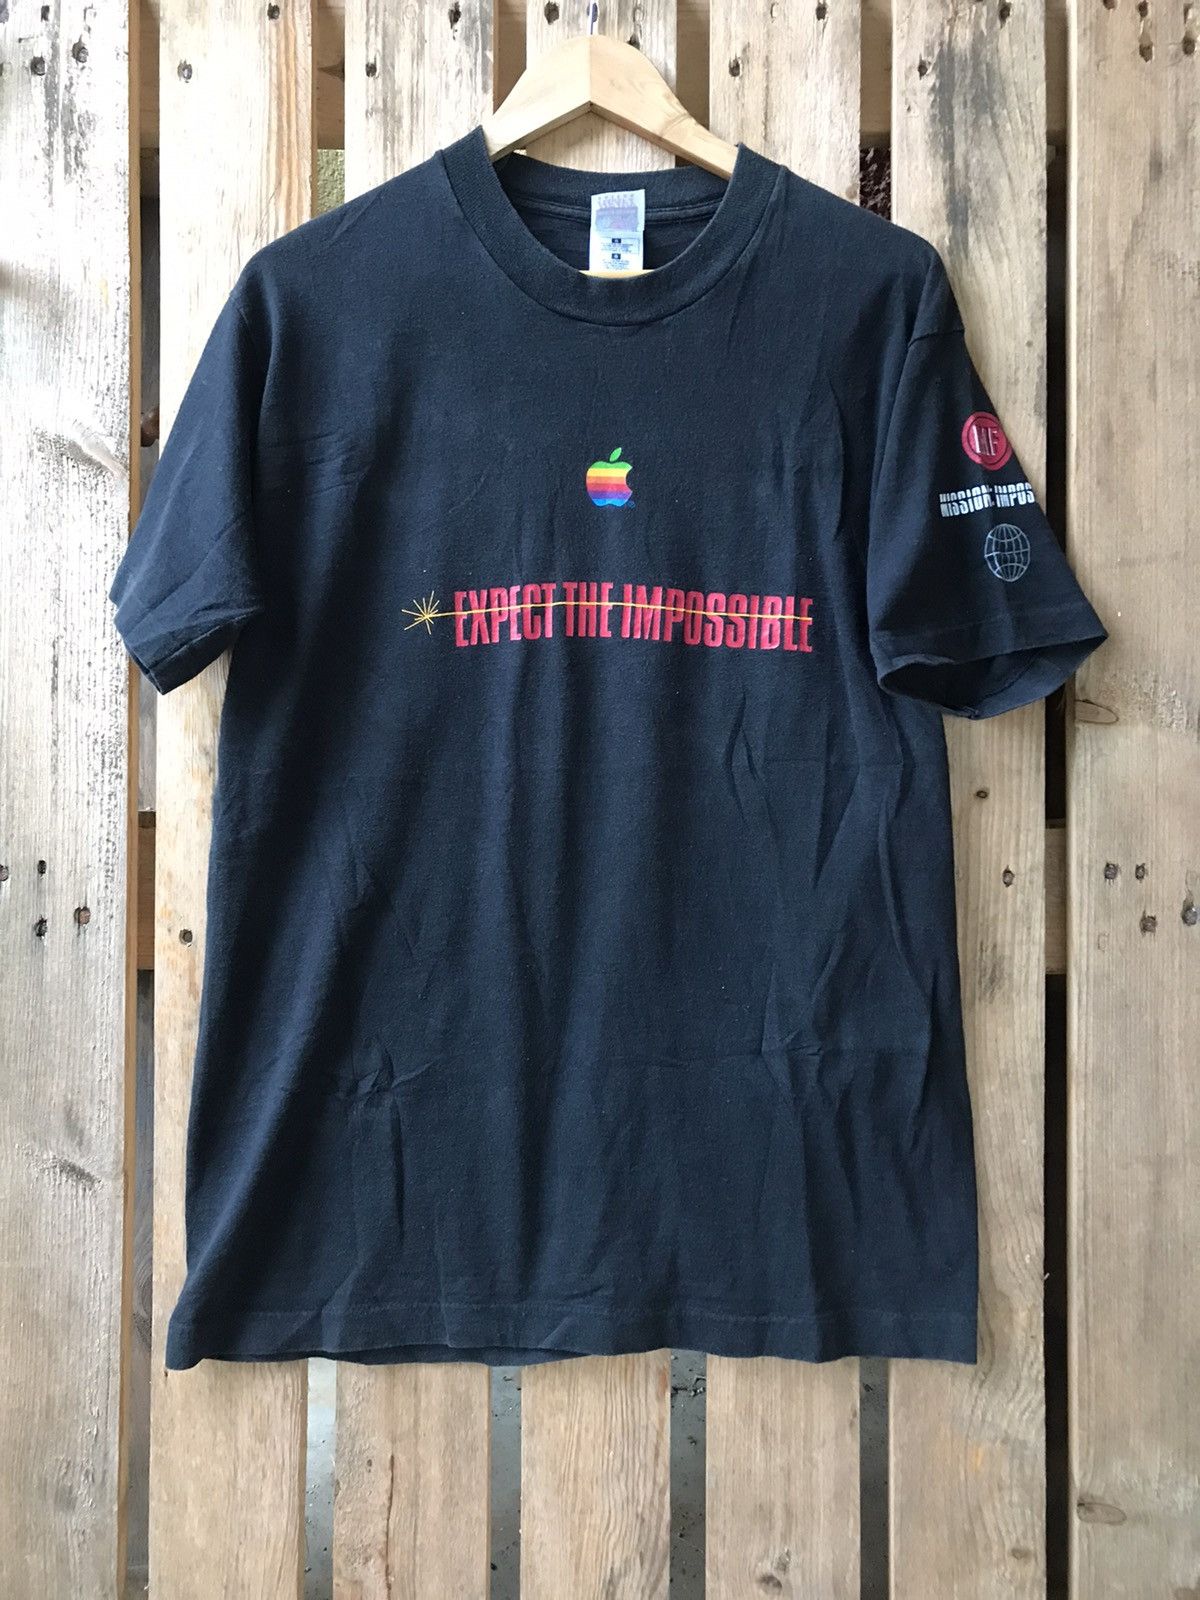 Apple Mission Impossible | Grailed